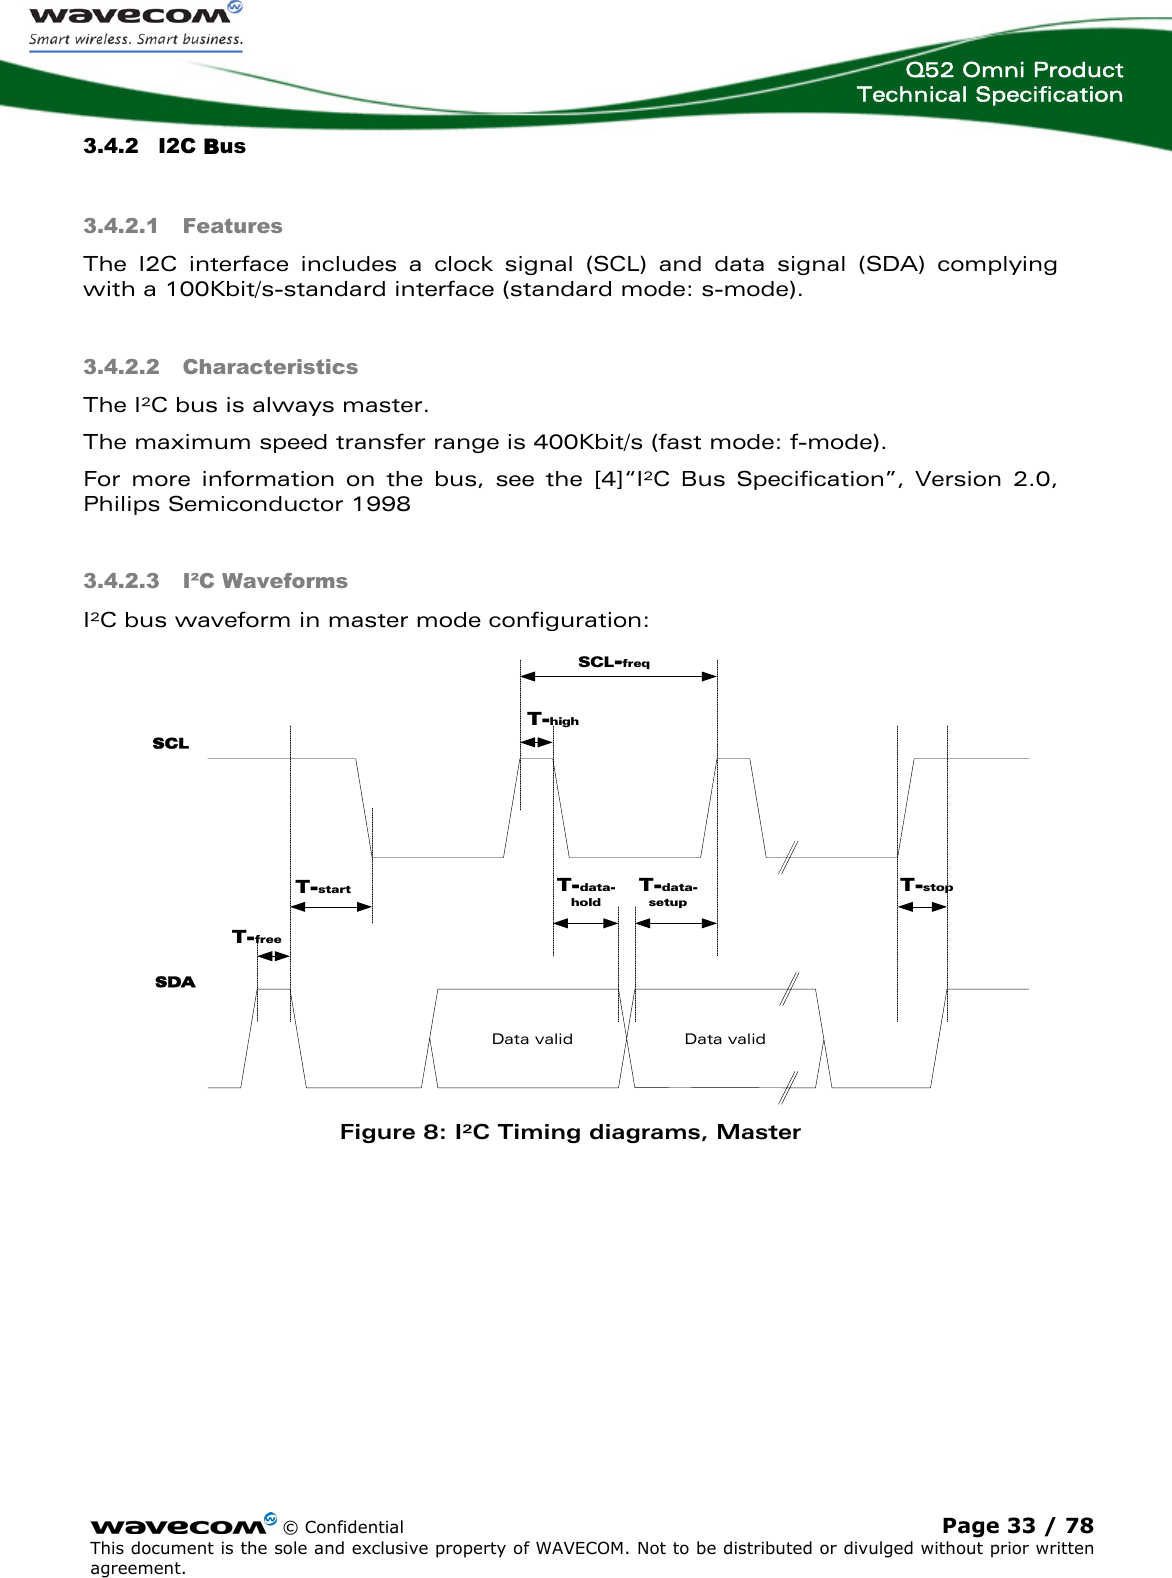  Q52 Omni Product Technical Specification    © Confidential Page 33 / 78 This document is the sole and exclusive property of WAVECOM. Not to be distributed or divulged without prior written agreement.  Data valid3.4.2 I2C Bus 3.4.2.1 Features The I2C interface includes a clock signal (SCL) and data signal (SDA) complying with a 100Kbit/s-standard interface (standard mode: s-mode).  3.4.2.2 Characteristics The I²C bus is always master. The maximum speed transfer range is 400Kbit/s (fast mode: f-mode).  For more information on the bus, see the [4]“I²C Bus Specification”, Version 2.0, Philips Semiconductor 19983.4.2.3 I²C Waveforms I²C bus waveform in master mode configuration: SCLSDAData validT-freeT-startT-highT-data-setupT-data-holdT-stopSCL-freq Figure 8: I²C Timing diagrams, Master  